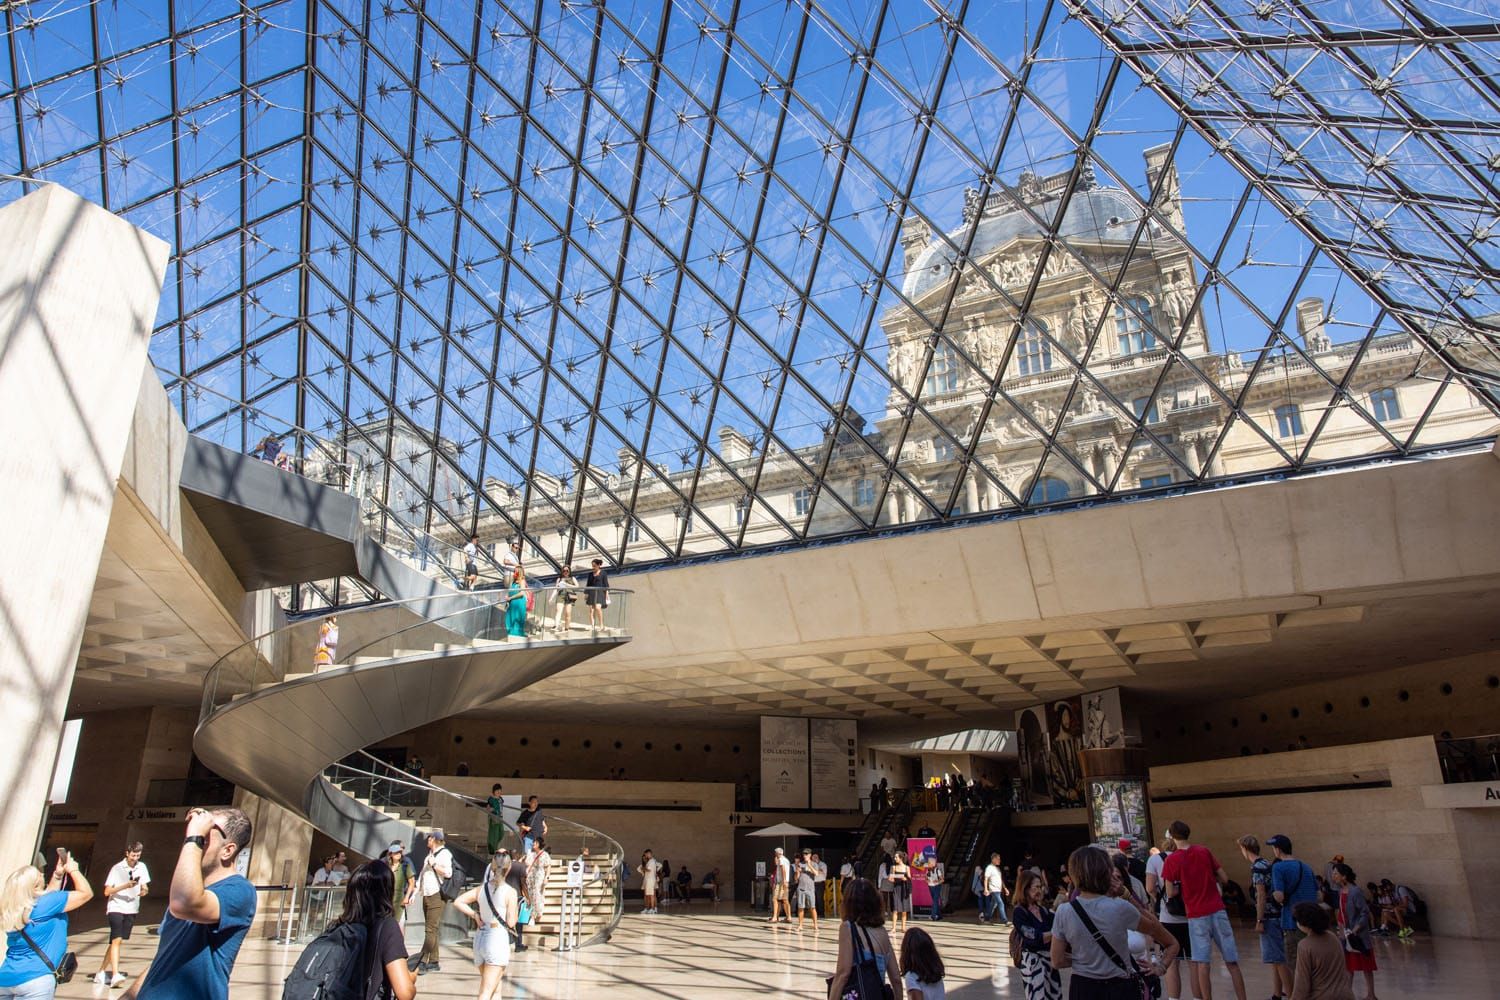 The Louvre Main Floor | How to visit the Louvre